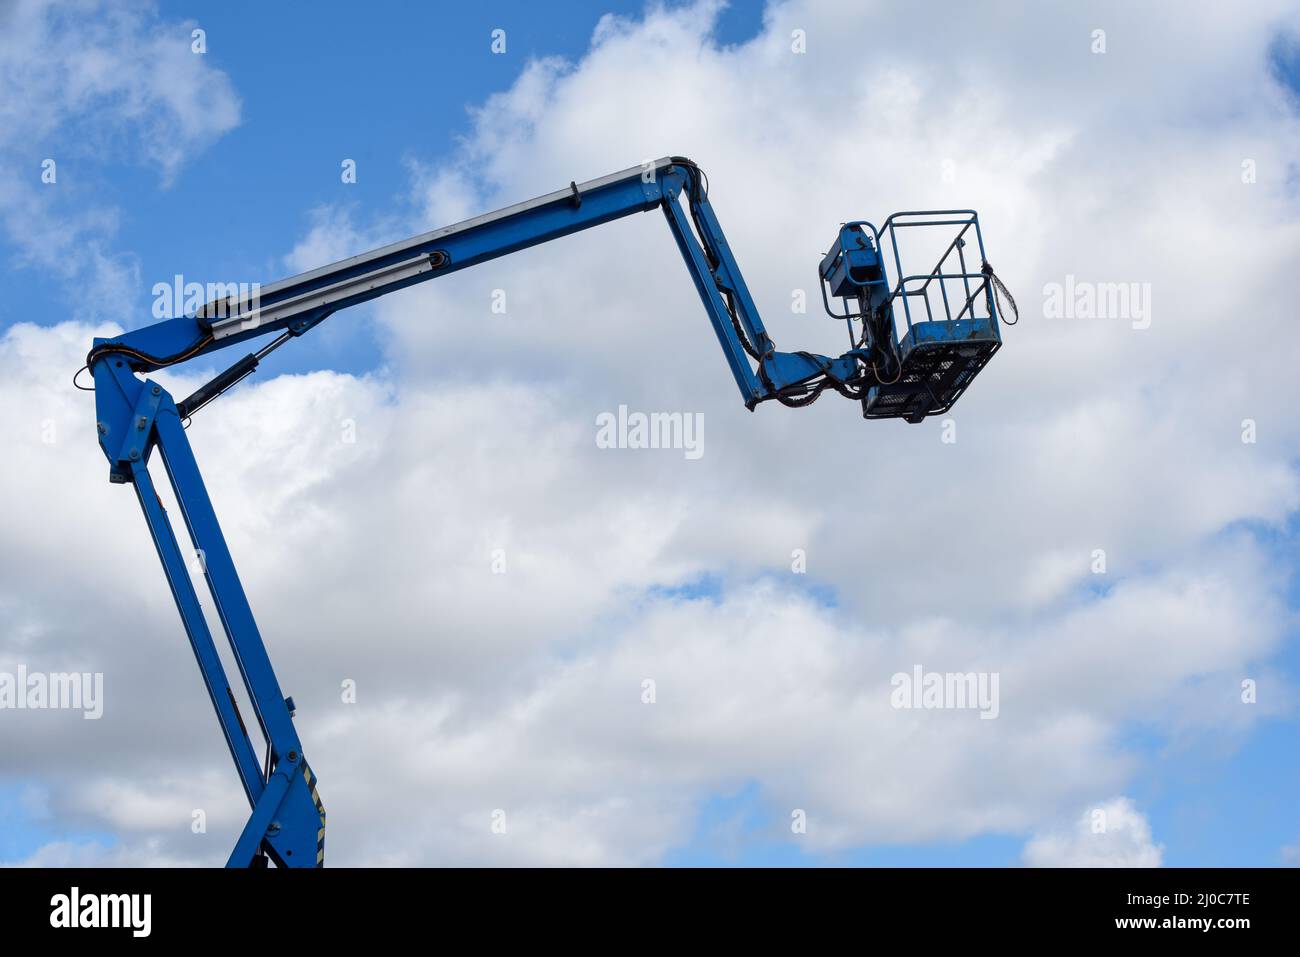 Cherry picker lift platform with telescopic arm on a building site to reach high up in construction industry Stock Photo